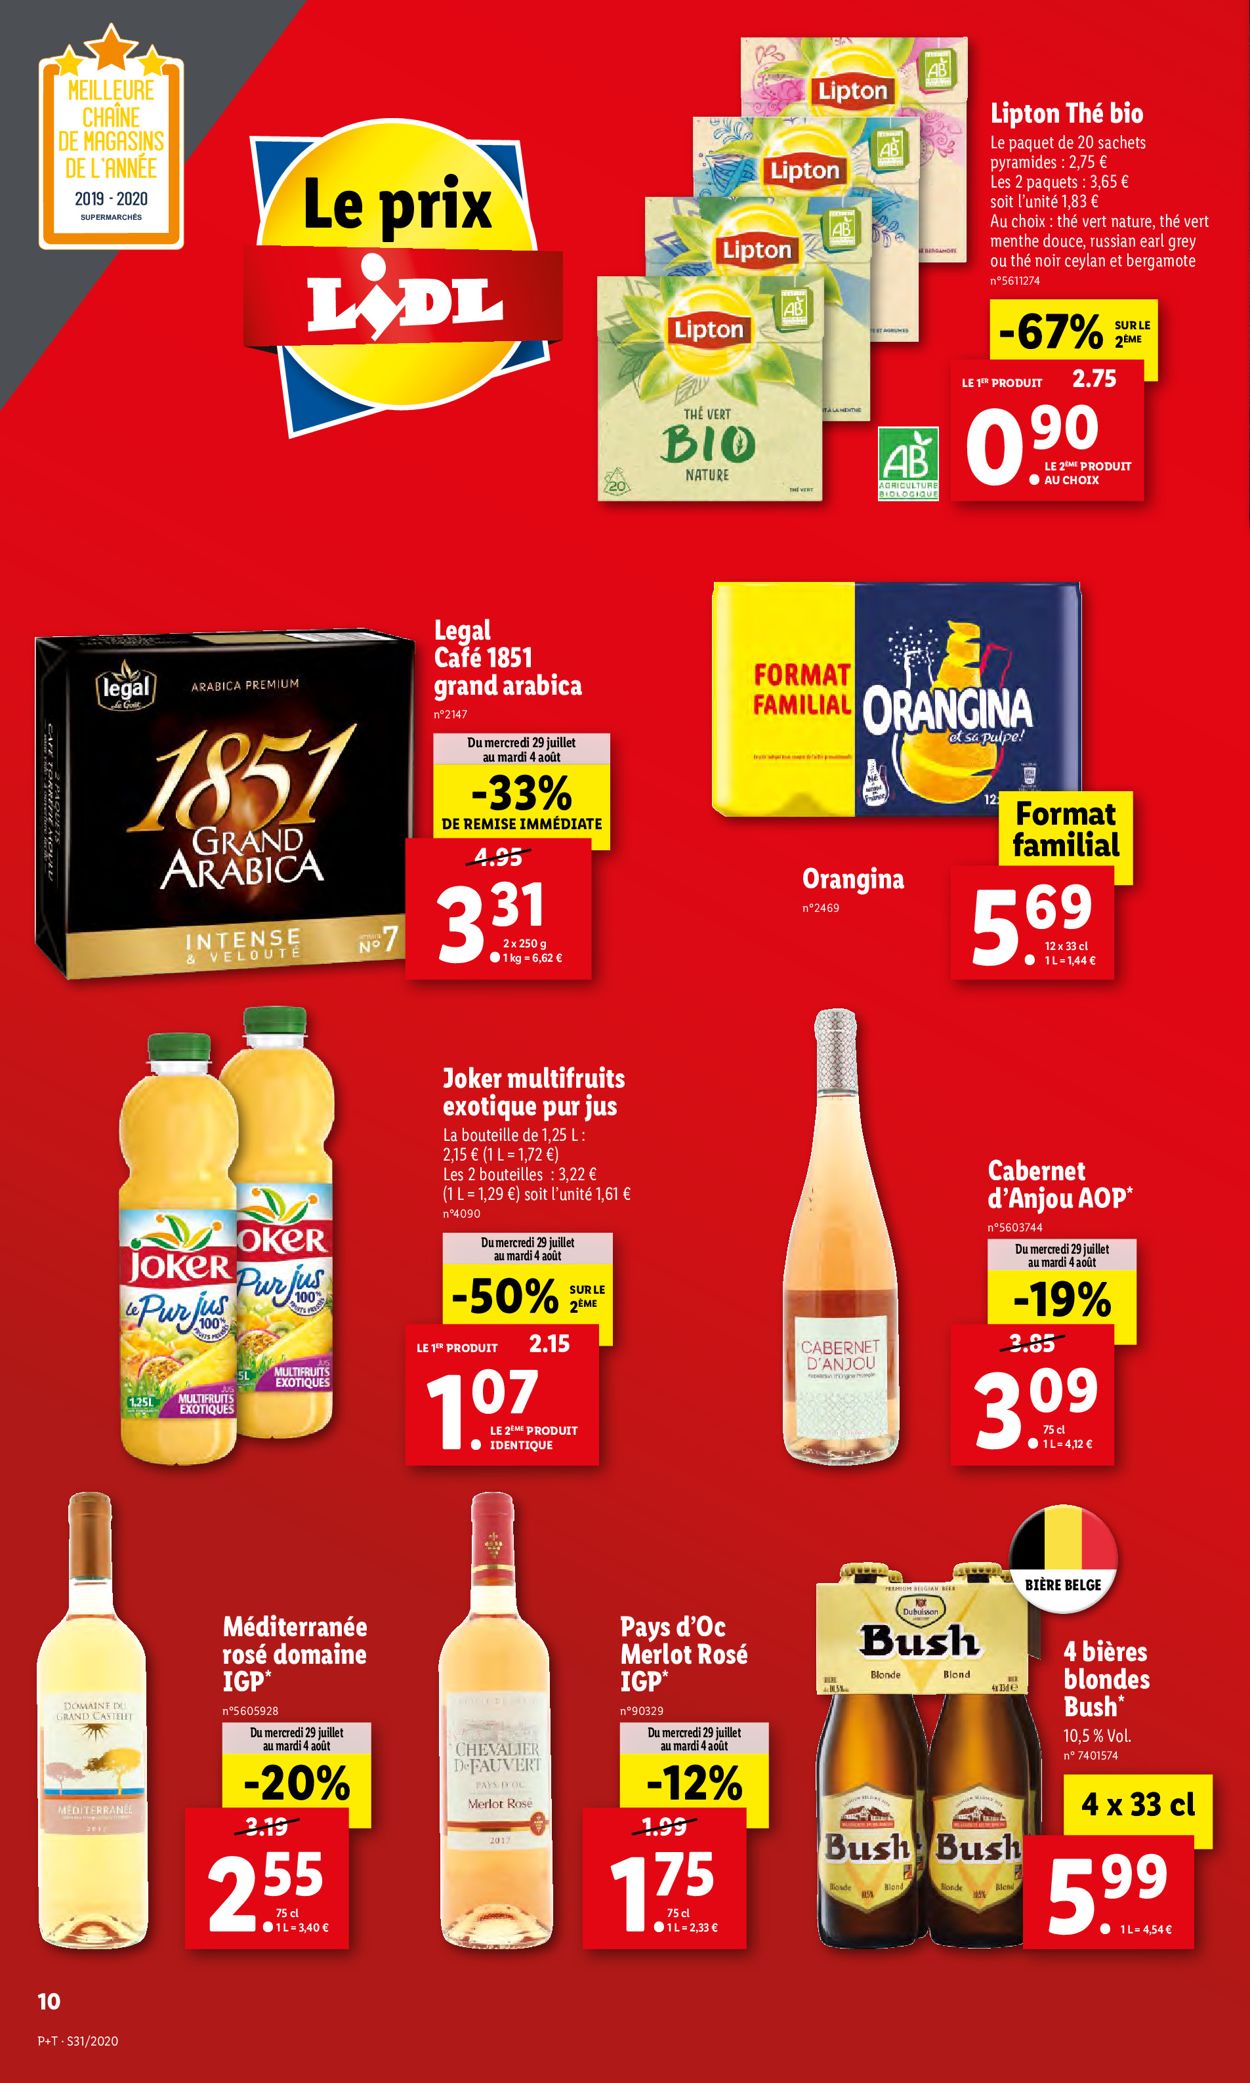 Lidl Catalogue - 29.07-04.08.2020 (Page 10)